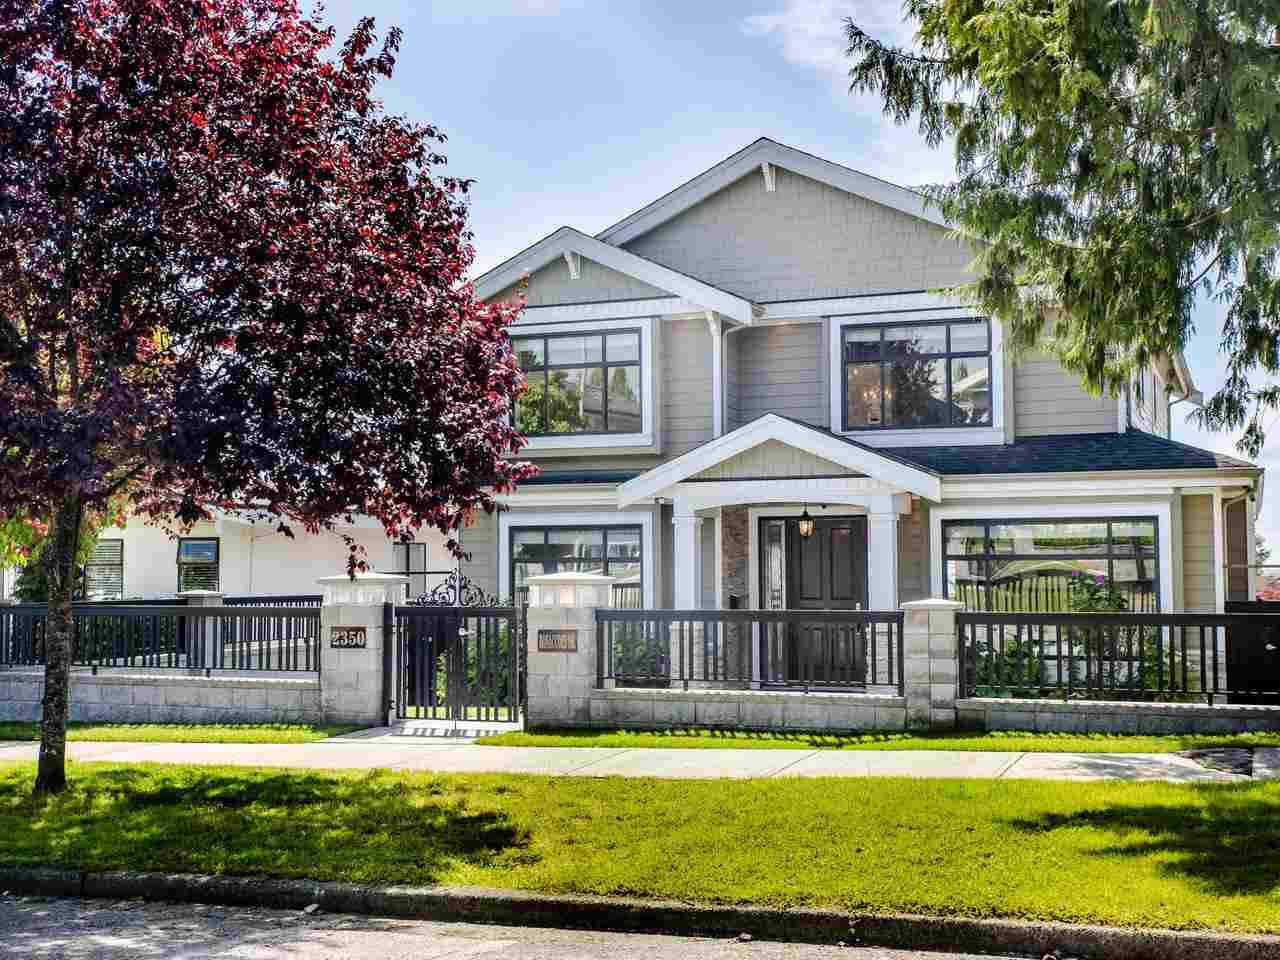 Main Photo: 2350 BONACCORD Drive in Vancouver: Fraserview VE House for sale (Vancouver East)  : MLS®# R2468026